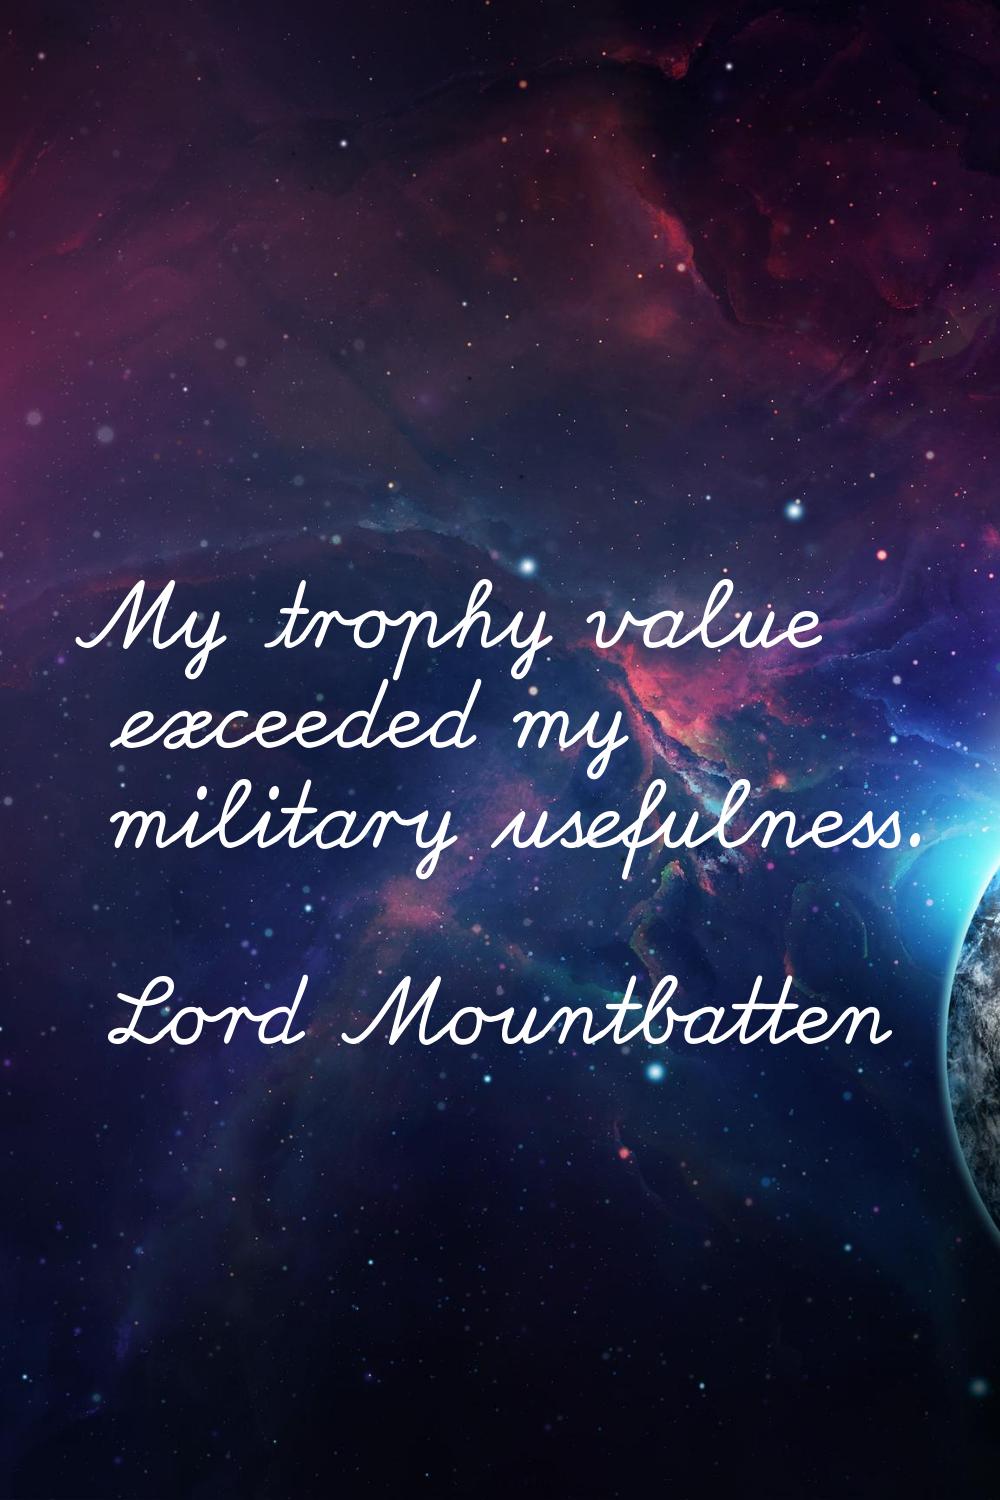 My trophy value exceeded my military usefulness.